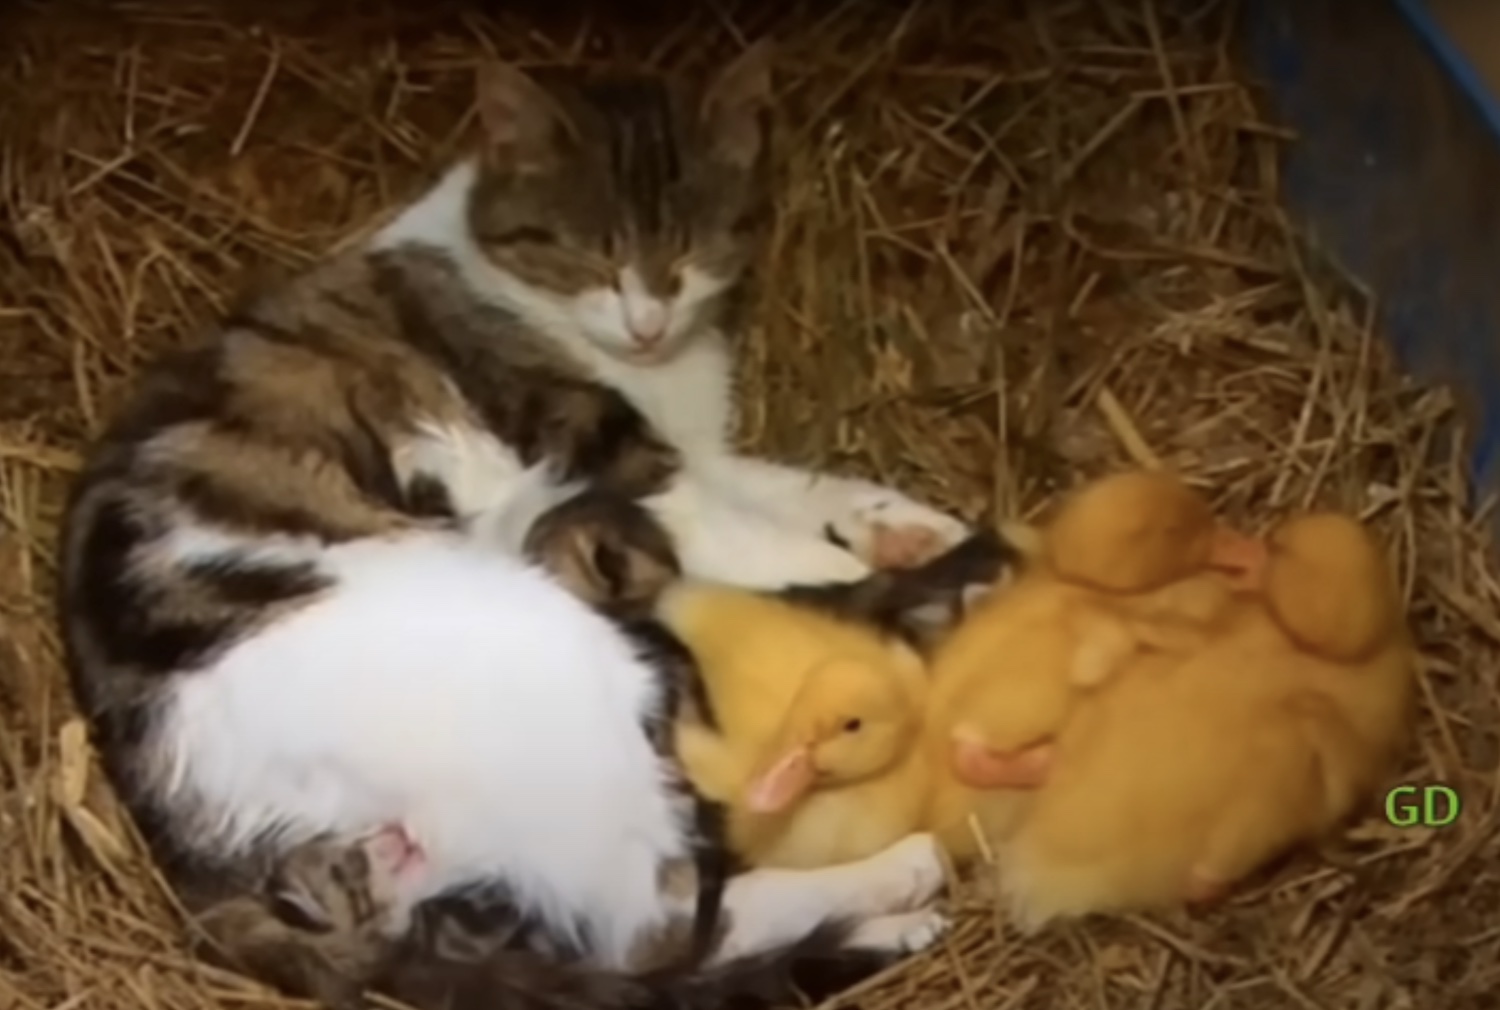 The Cat and the Ducklings